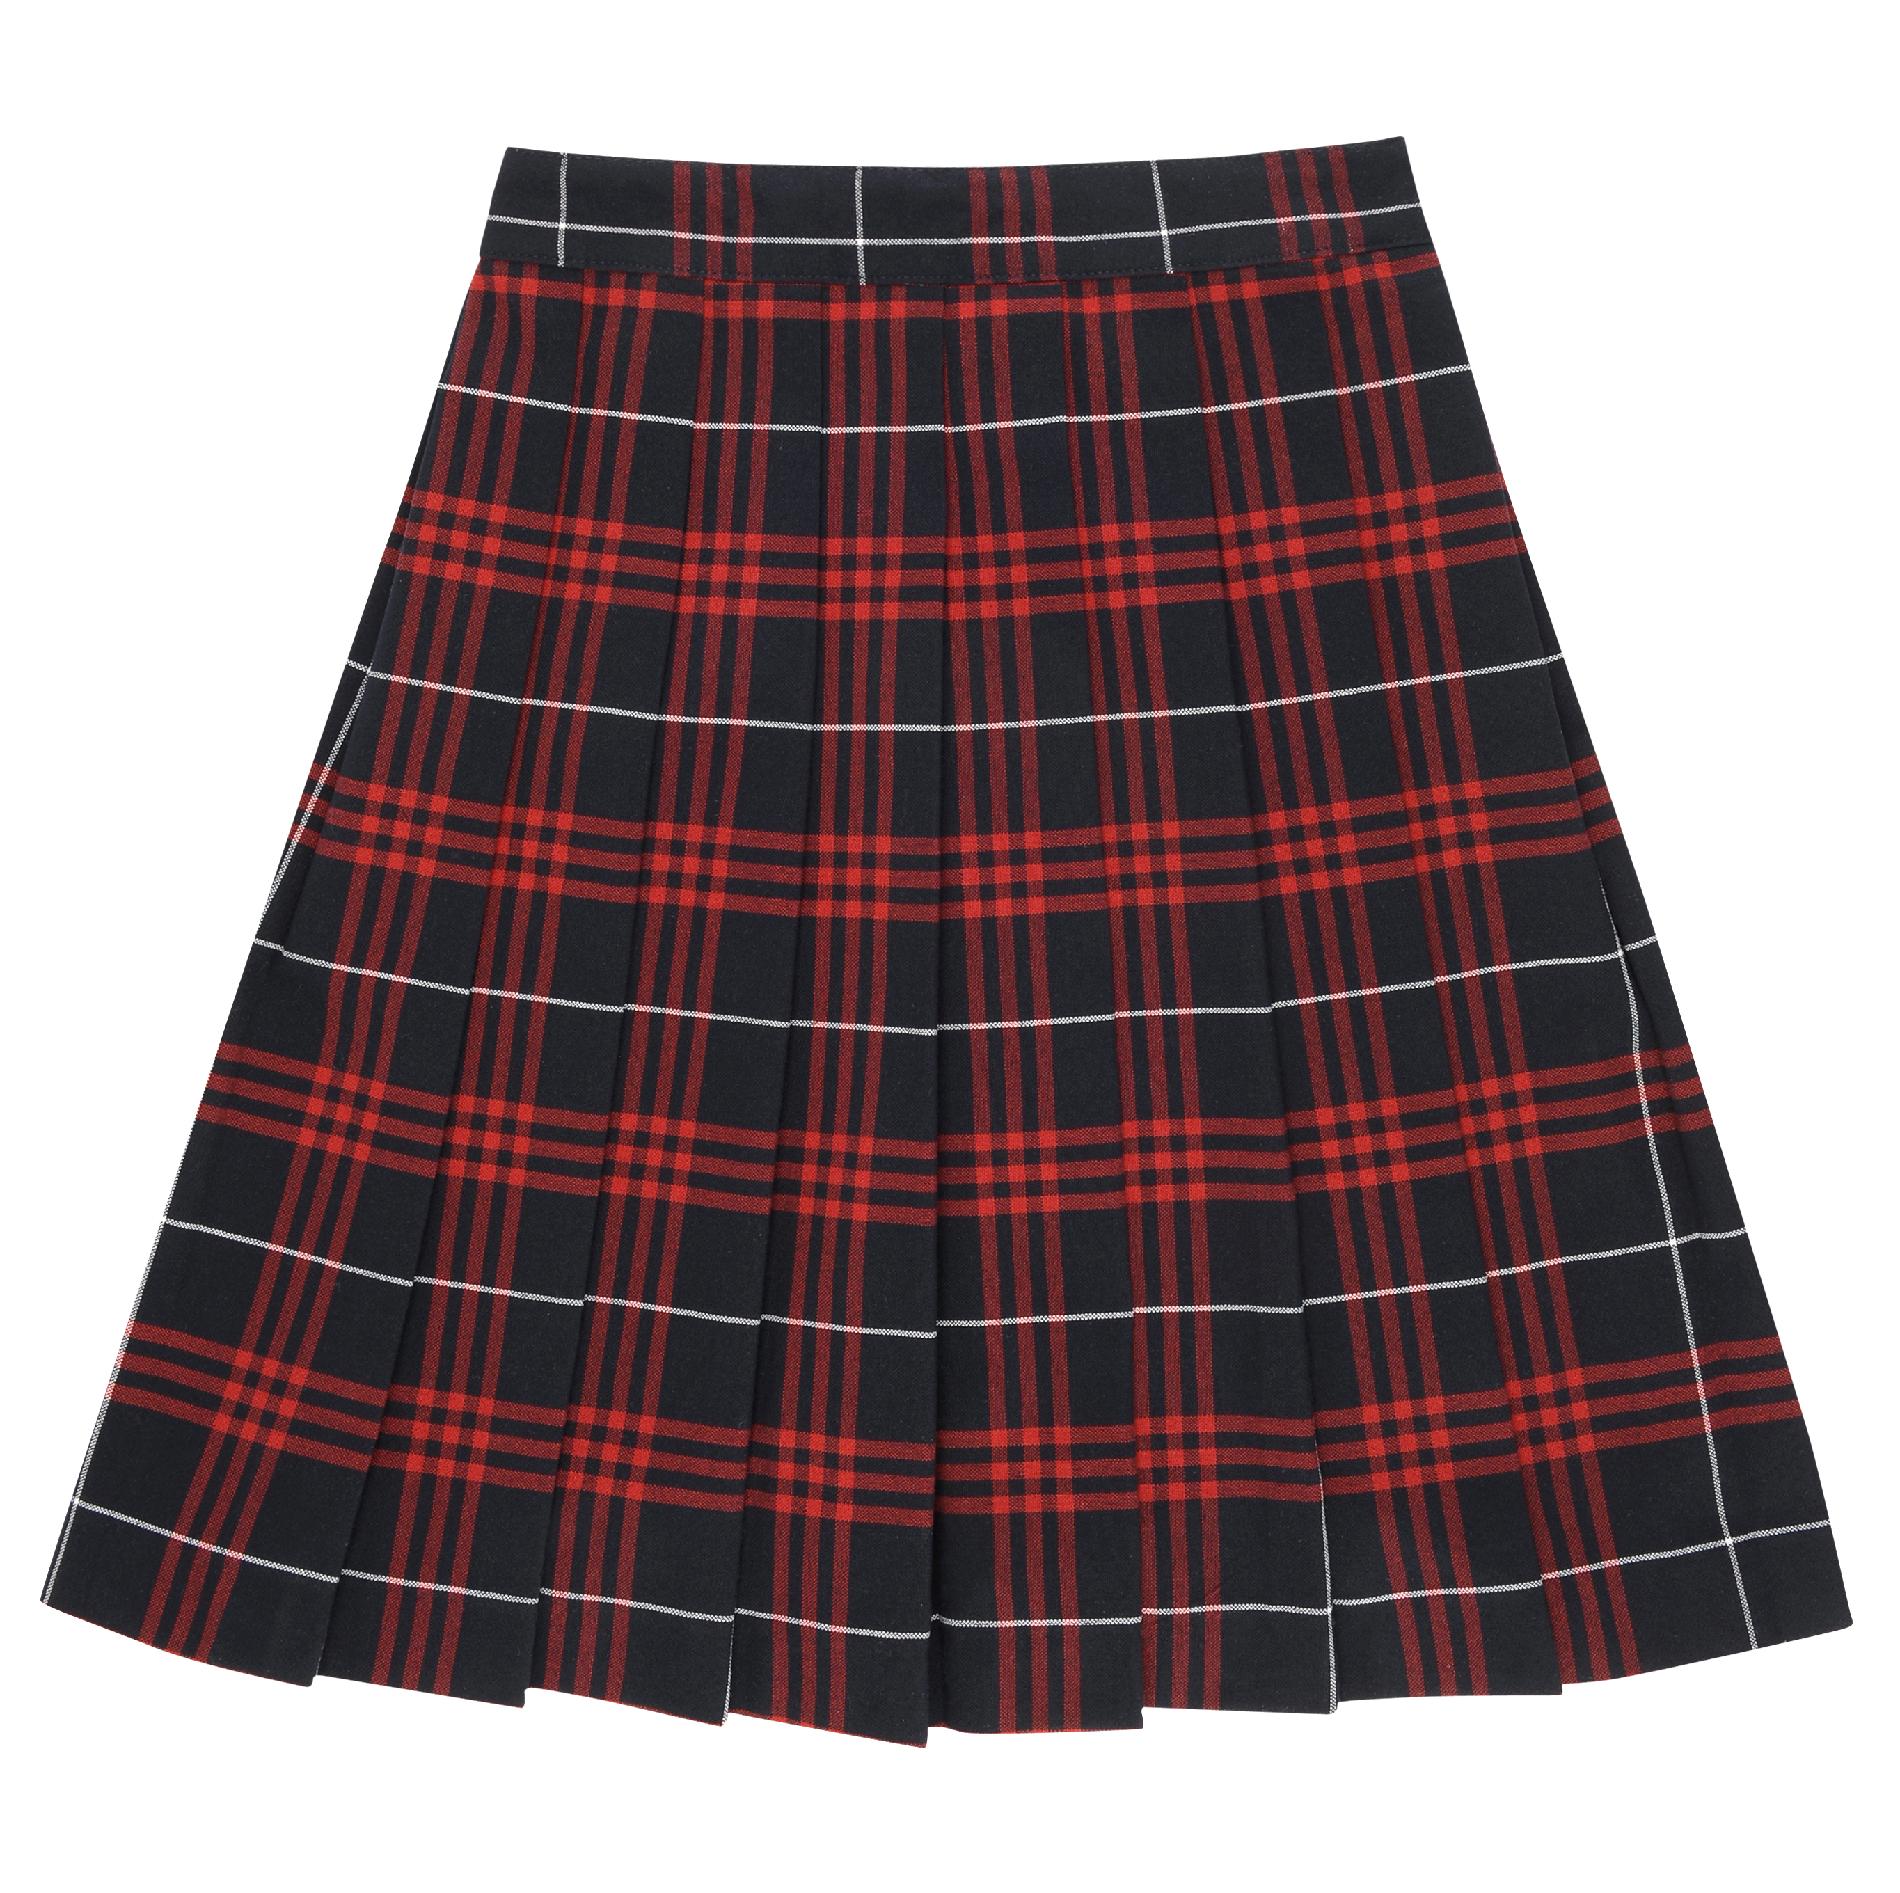 At School by French Toast Girls 4-6X Navy-Red Plaid Pleated Skirt